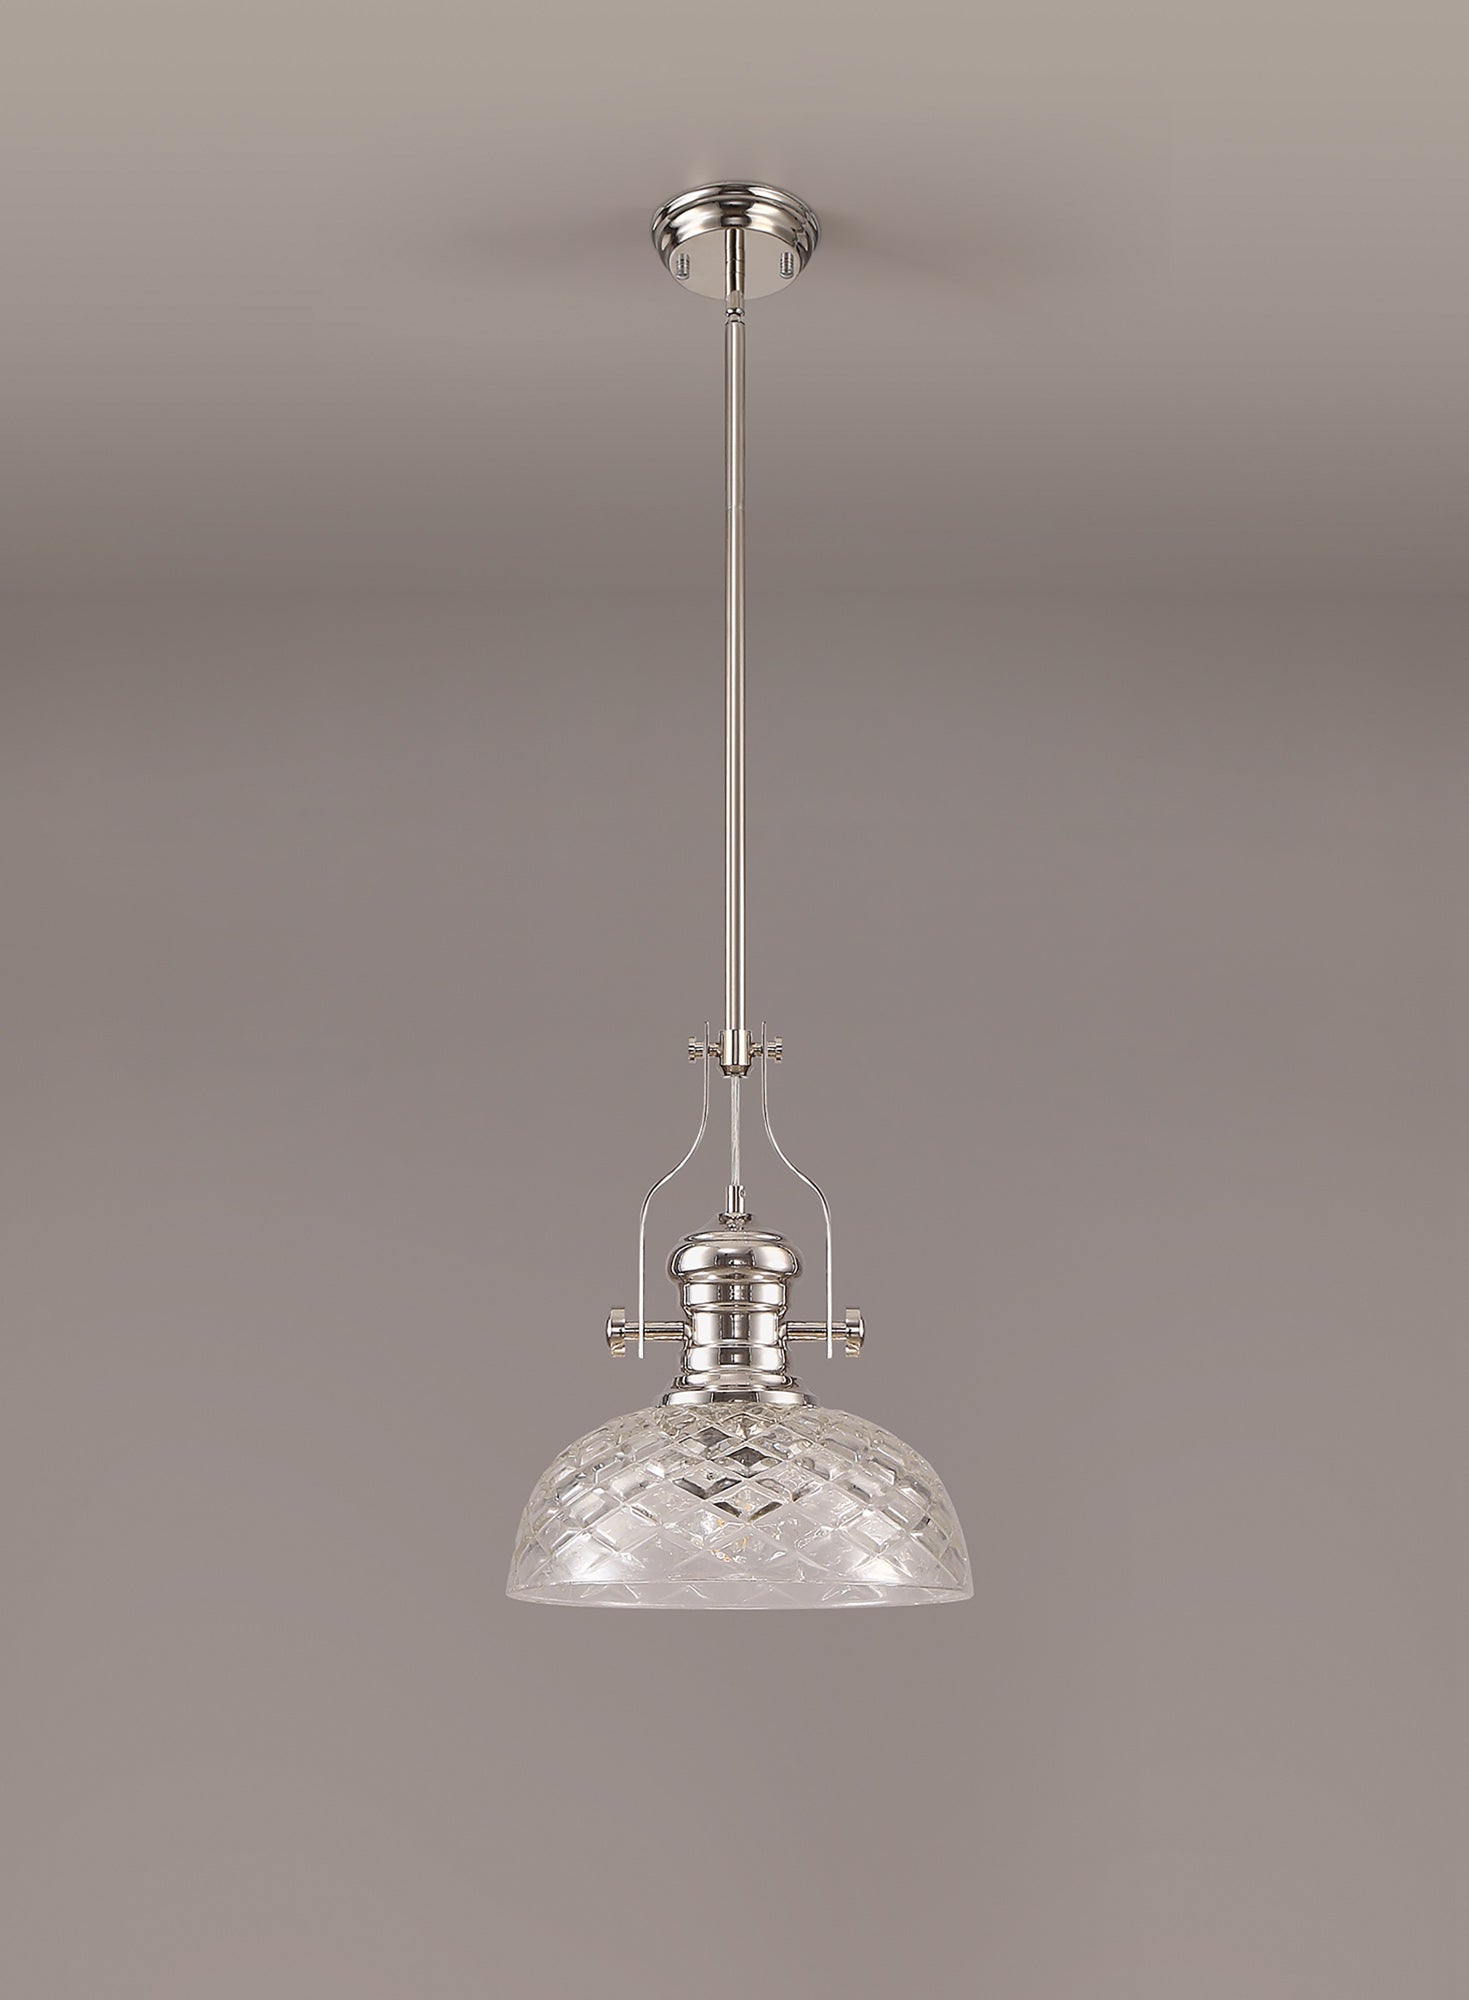 Docker Pendant With 30cm Flat Round Patterned Shade, 1 x E27, Polished Nickel/Clear Glass LOK104663